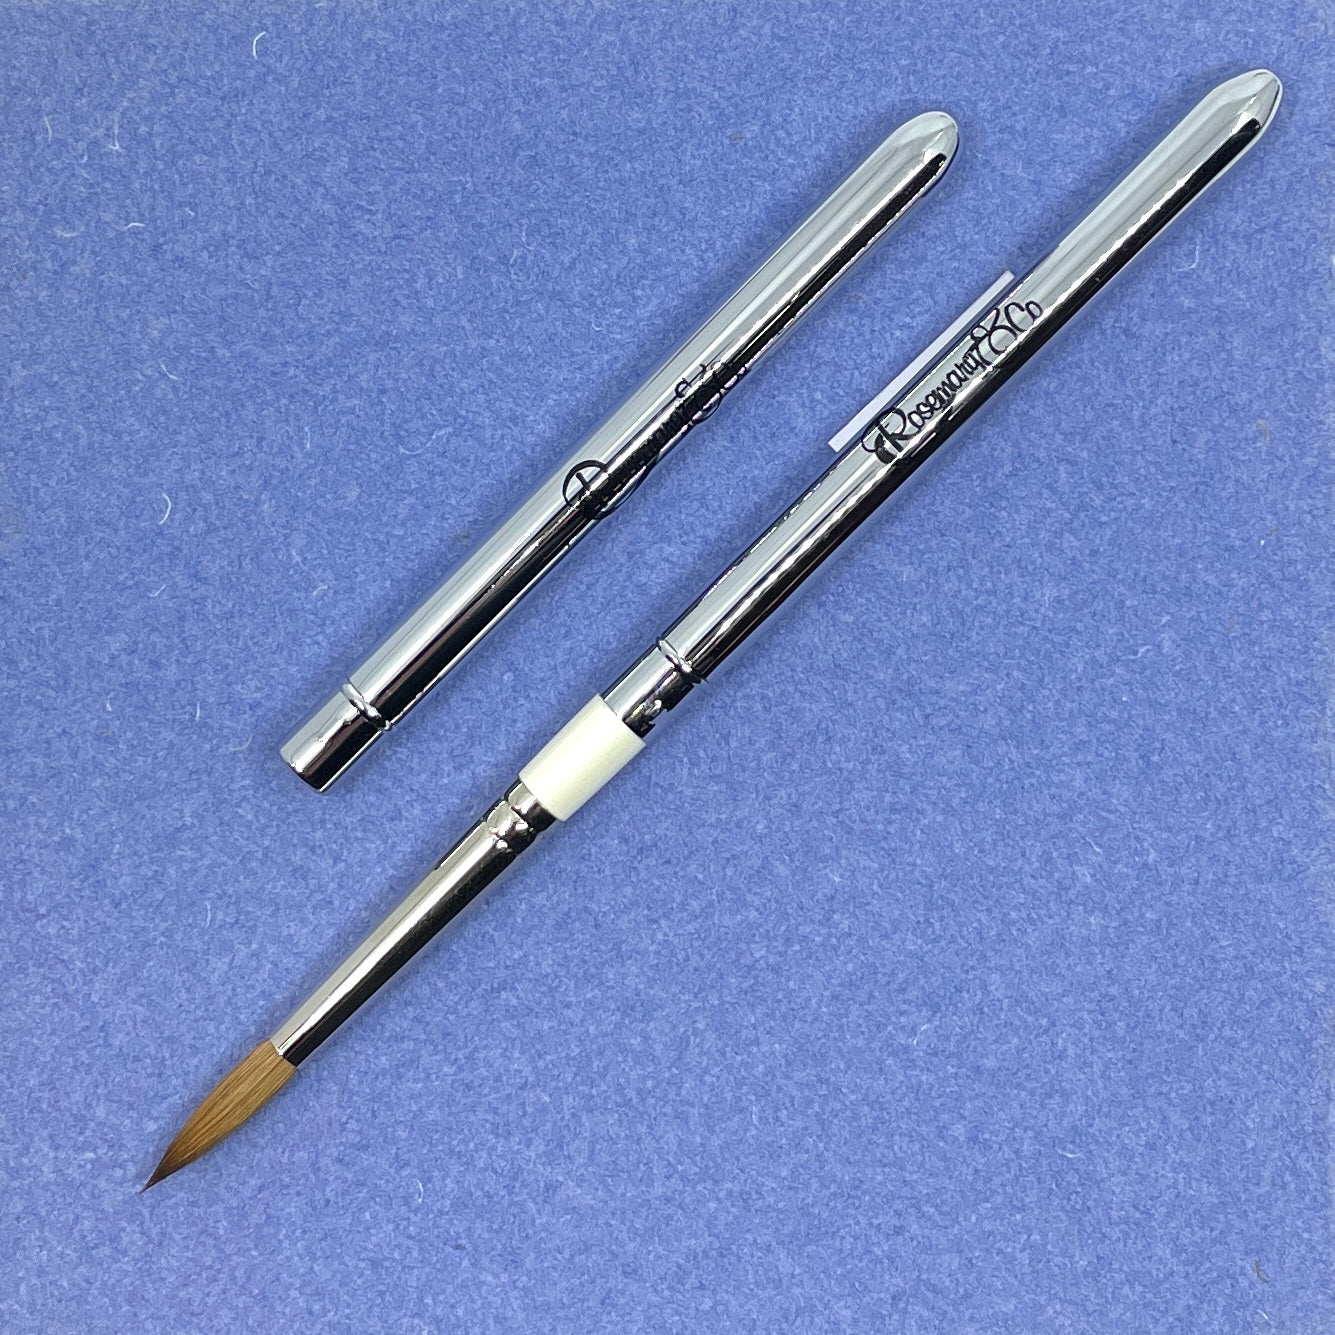 ROSEMARY & CO Reversible Pocket Brush - R2 - Pure Kolinsky Sable - Pointed Size 8 (5.2 x 24.2mm)